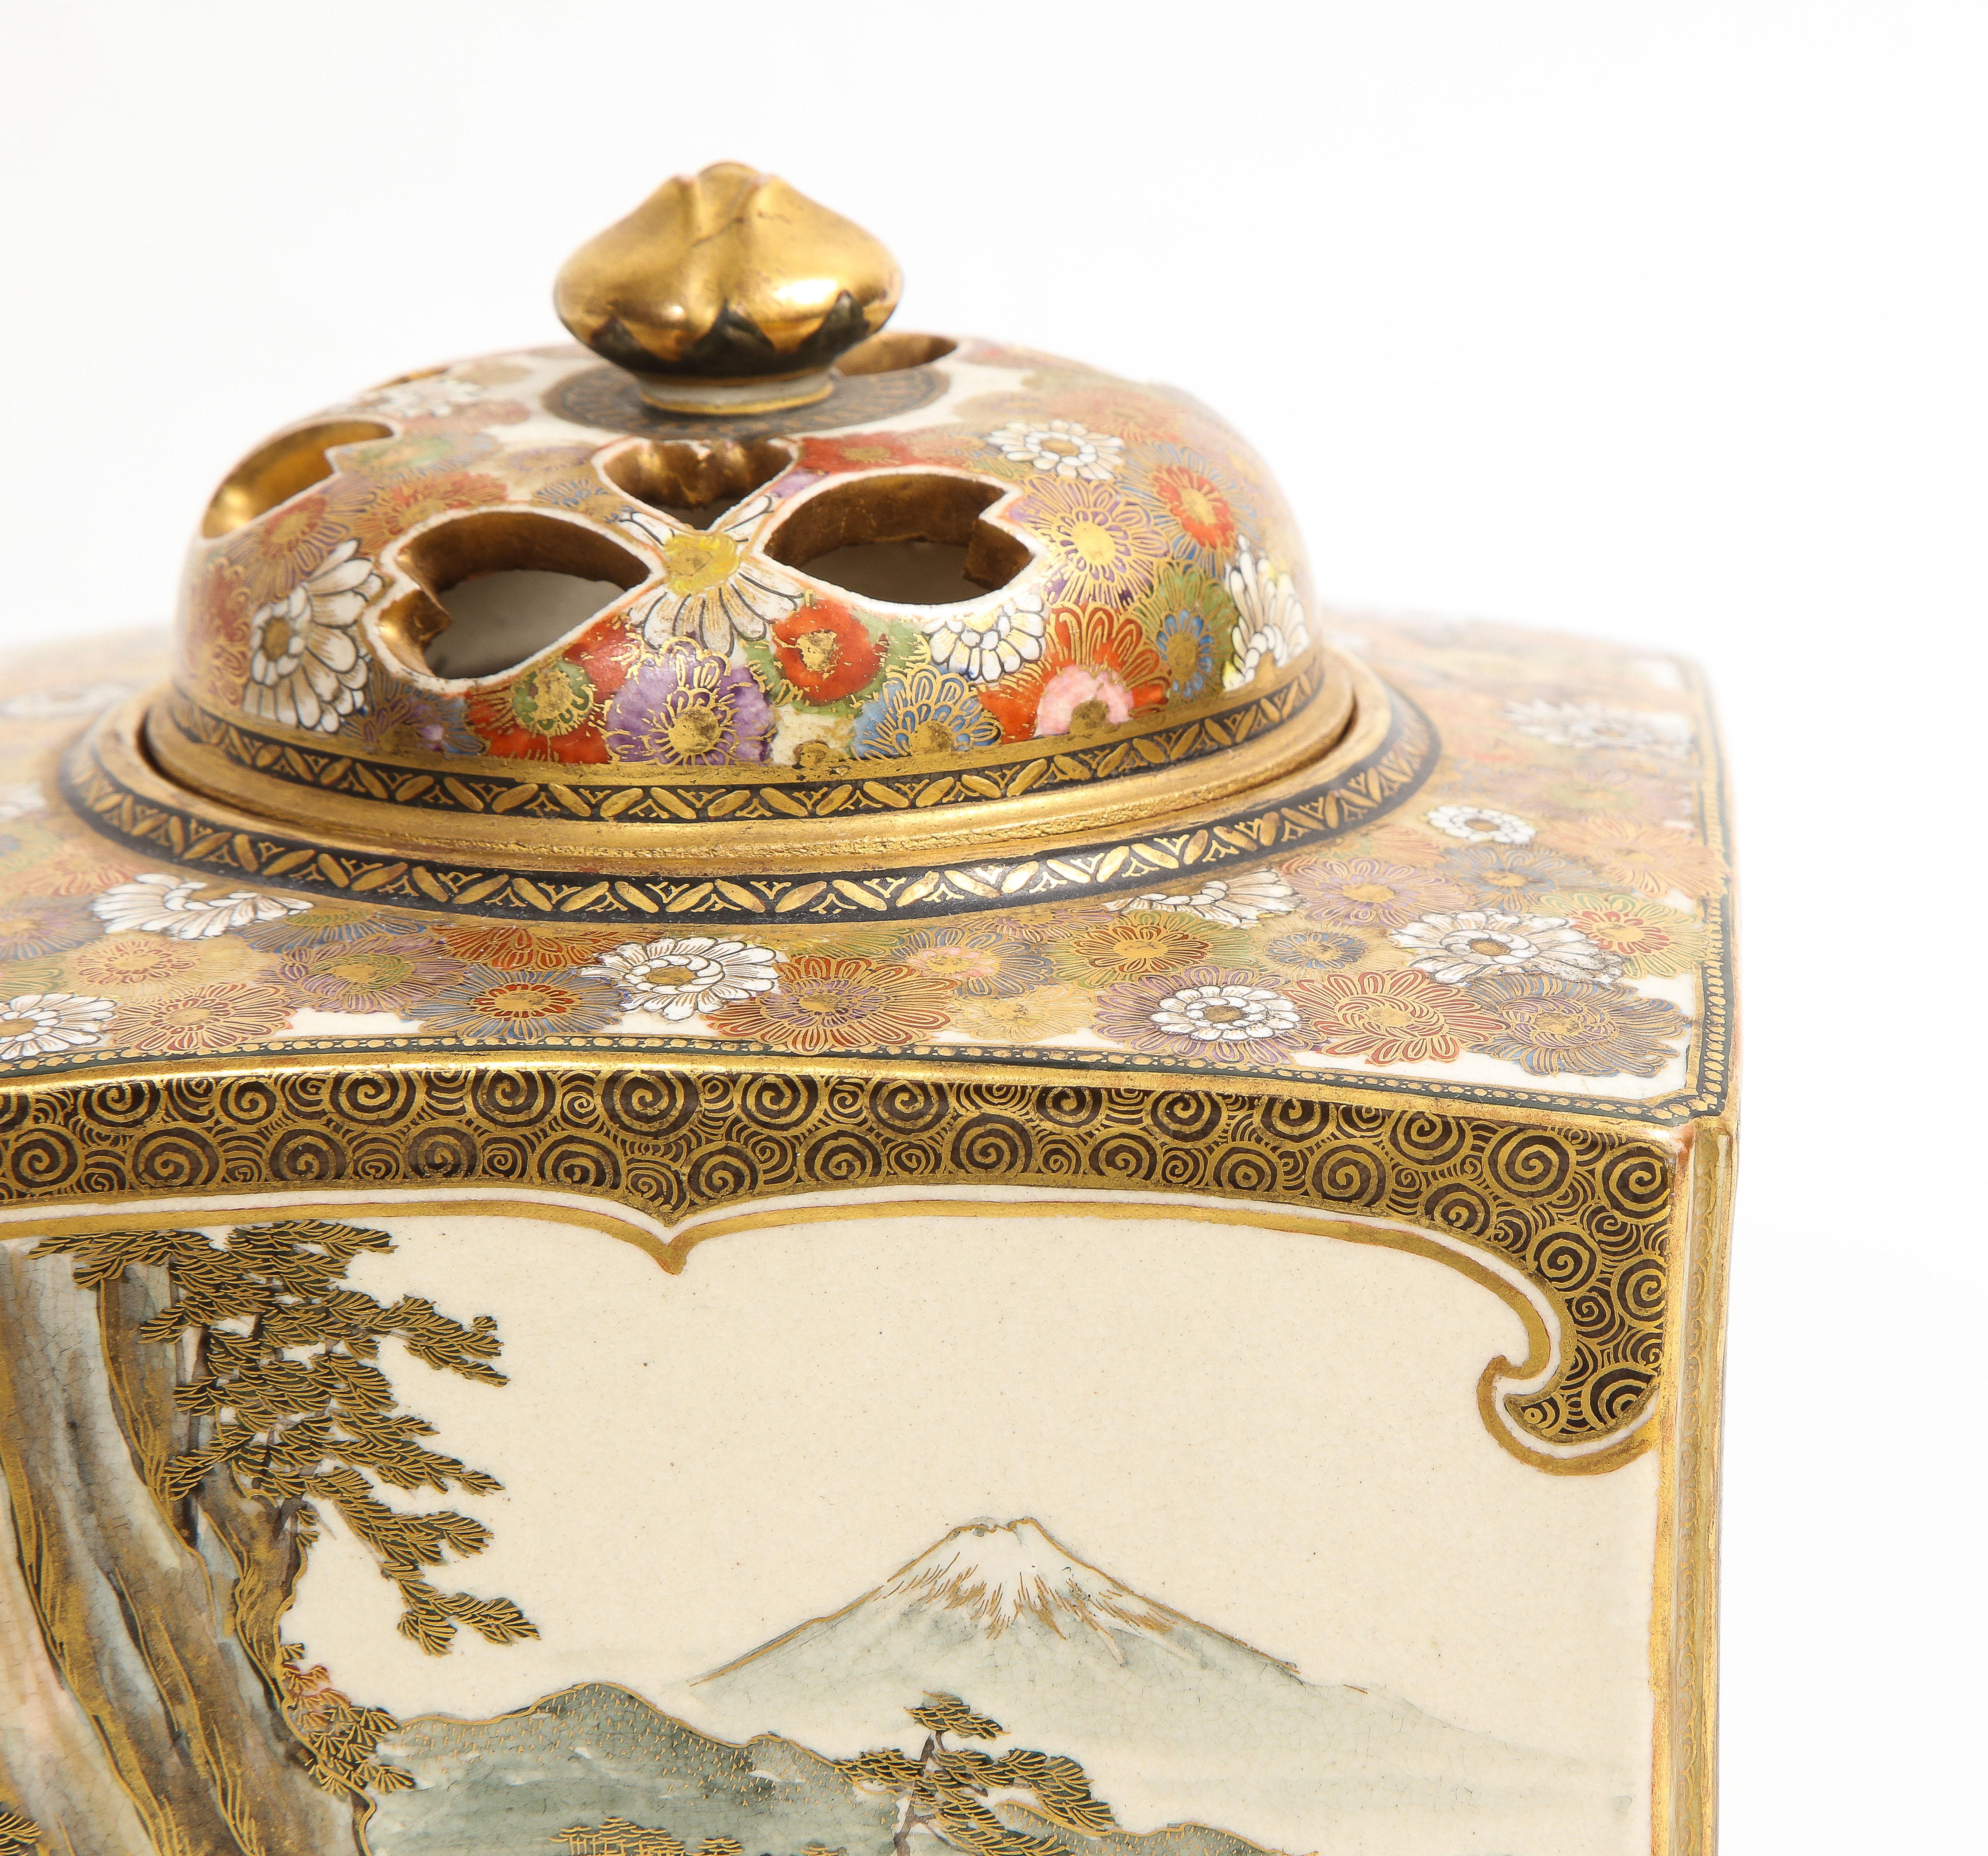 A Japanese Meiji Period (1868-1912).Large Satsuma Square Censer And Cover, Mark 5